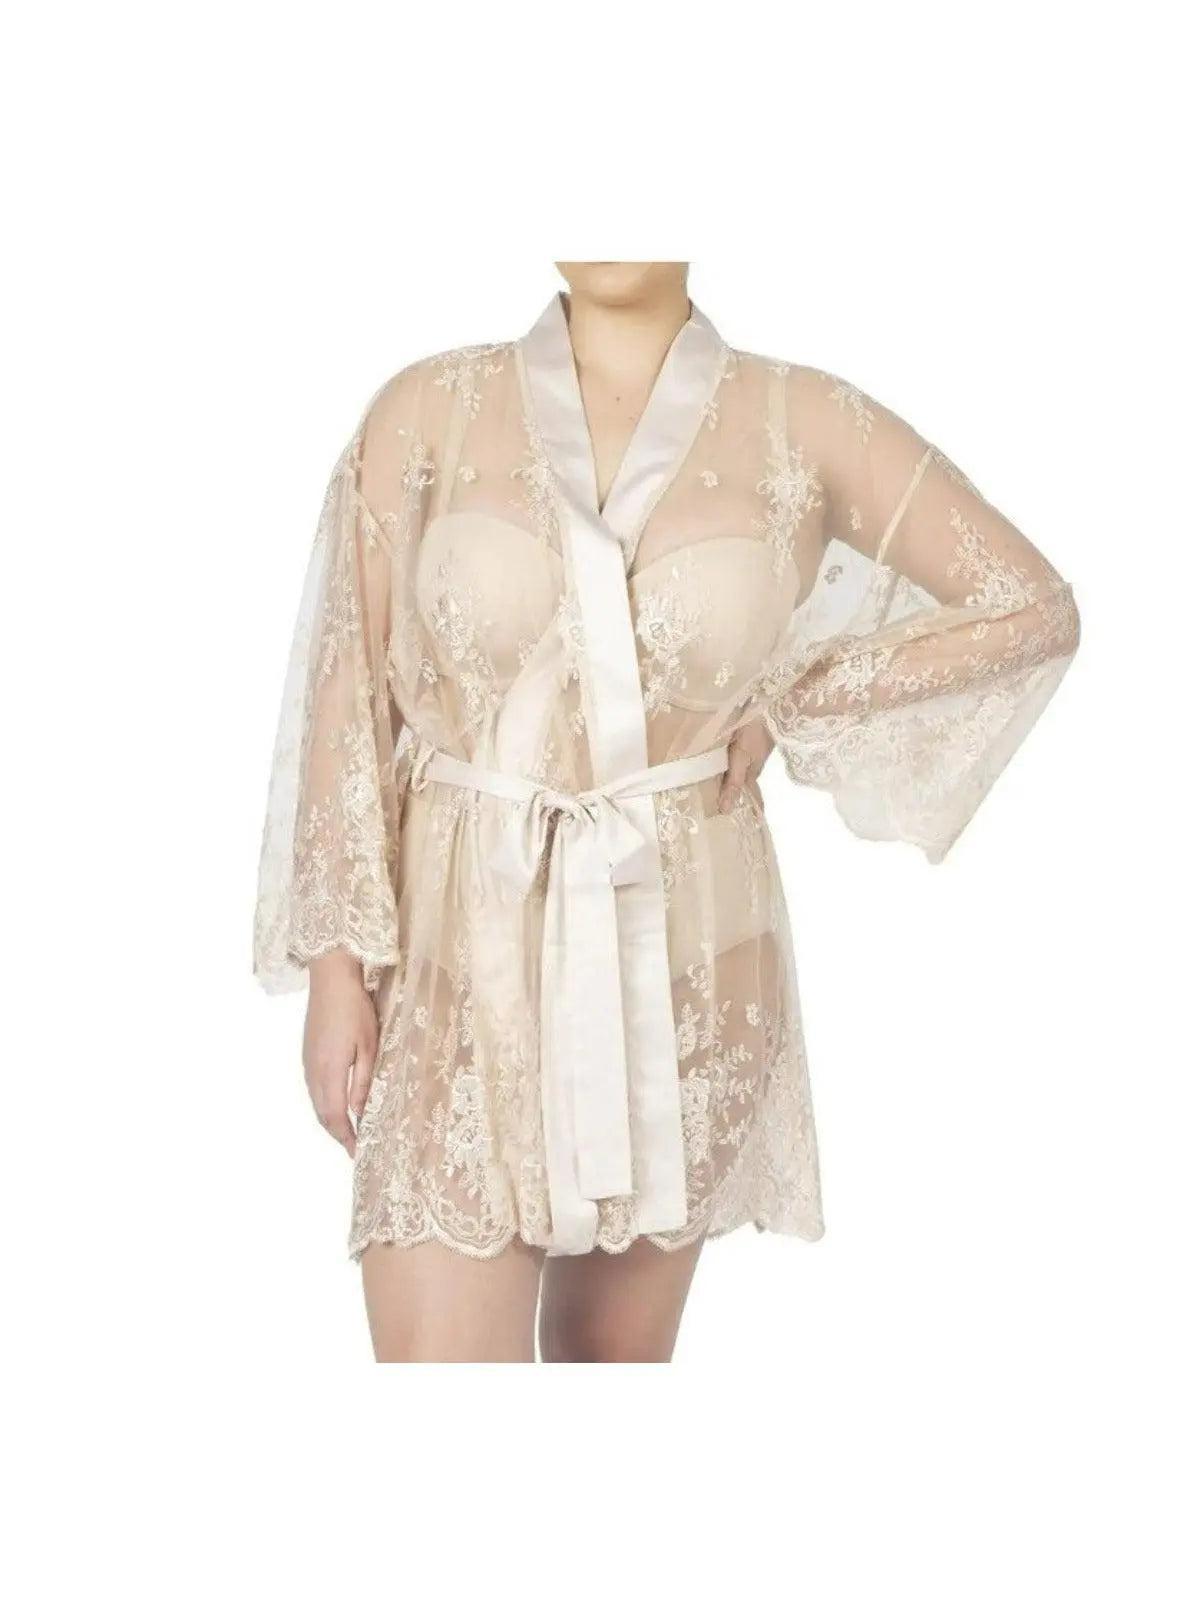 Darling Cover Up in Champagne